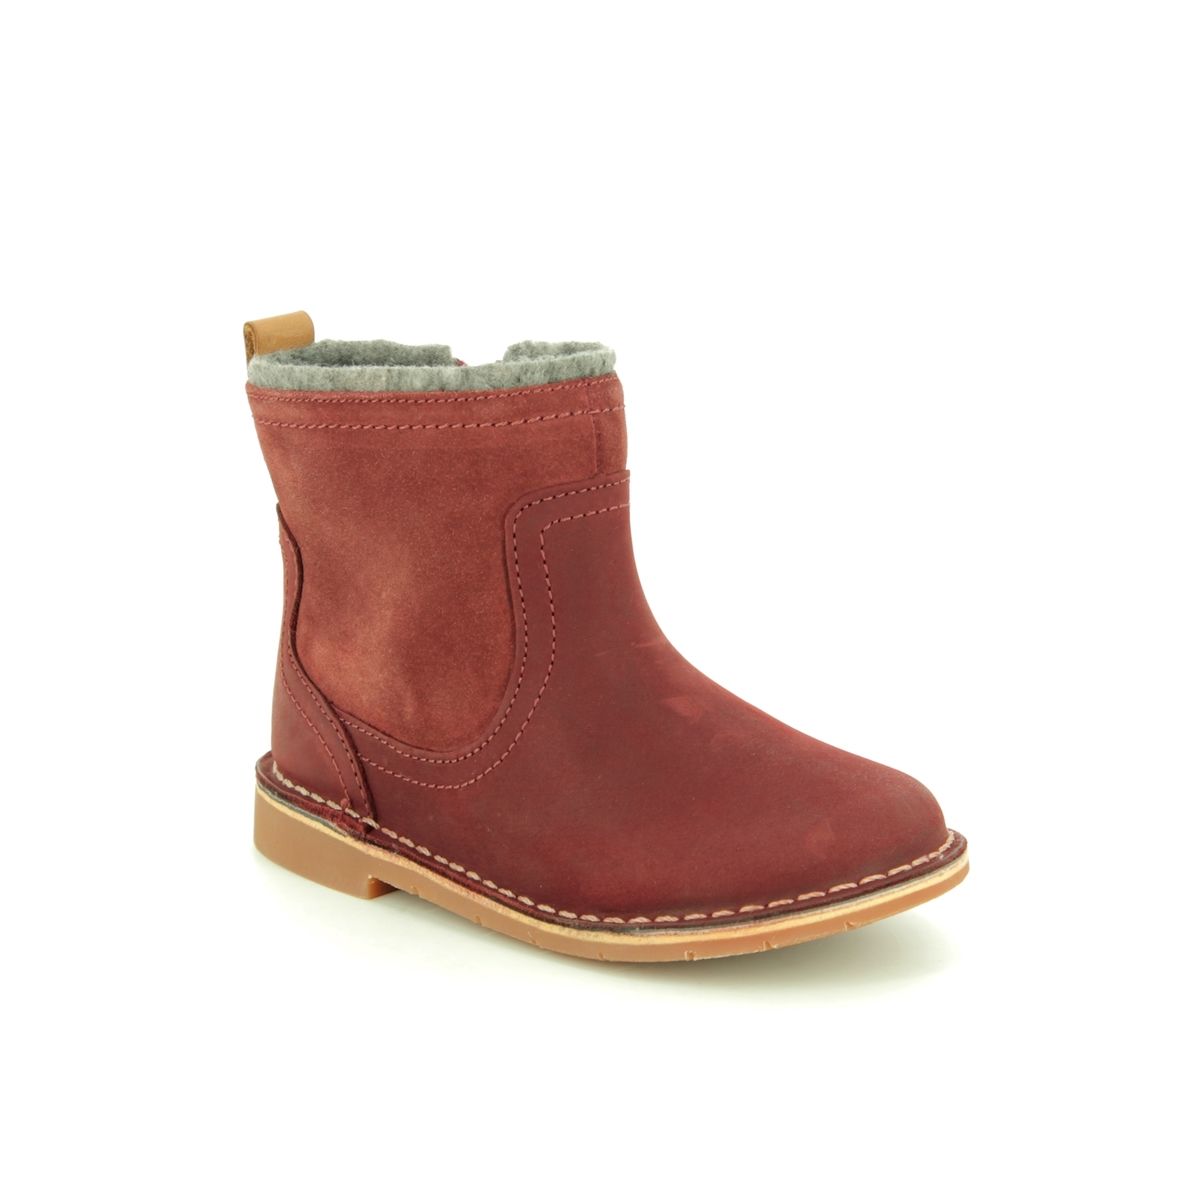 Clarks Comet Frost T Red leather Kids Toddler Girls Boots 4385-46F in a Plain Leather in Size 7.5